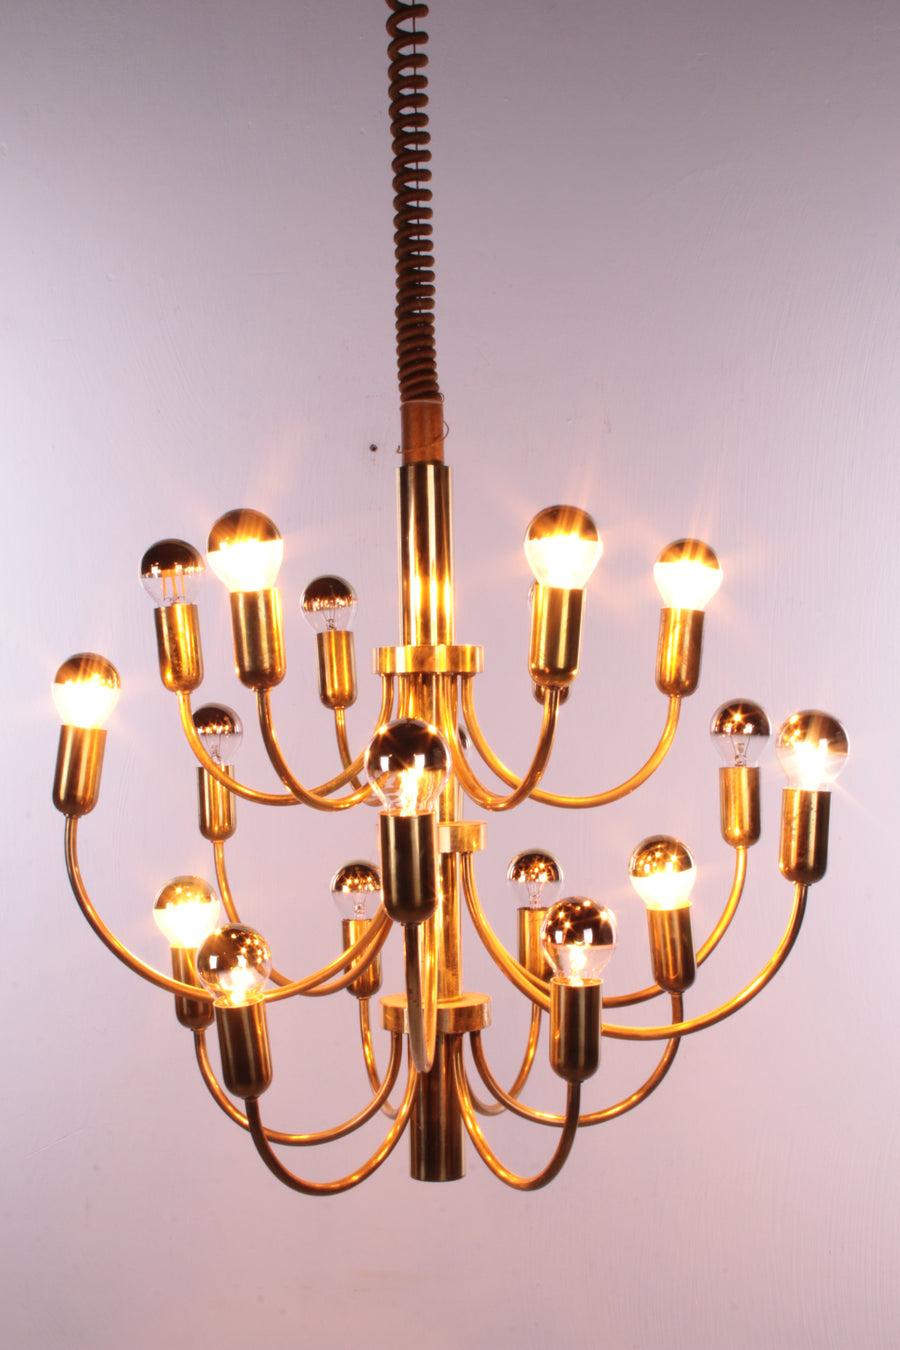 Vintage Italian Pendant Lamp Hollywood Regency, 1960

Very beautiful design lamp in the style of Gaetano Sciolari, Italy 1960.

Gaetano Sciolari vintage brass 18 light Pistillo candlestick ceiling lamp, 1970s, Italy.

This nature-inspired lamp is a